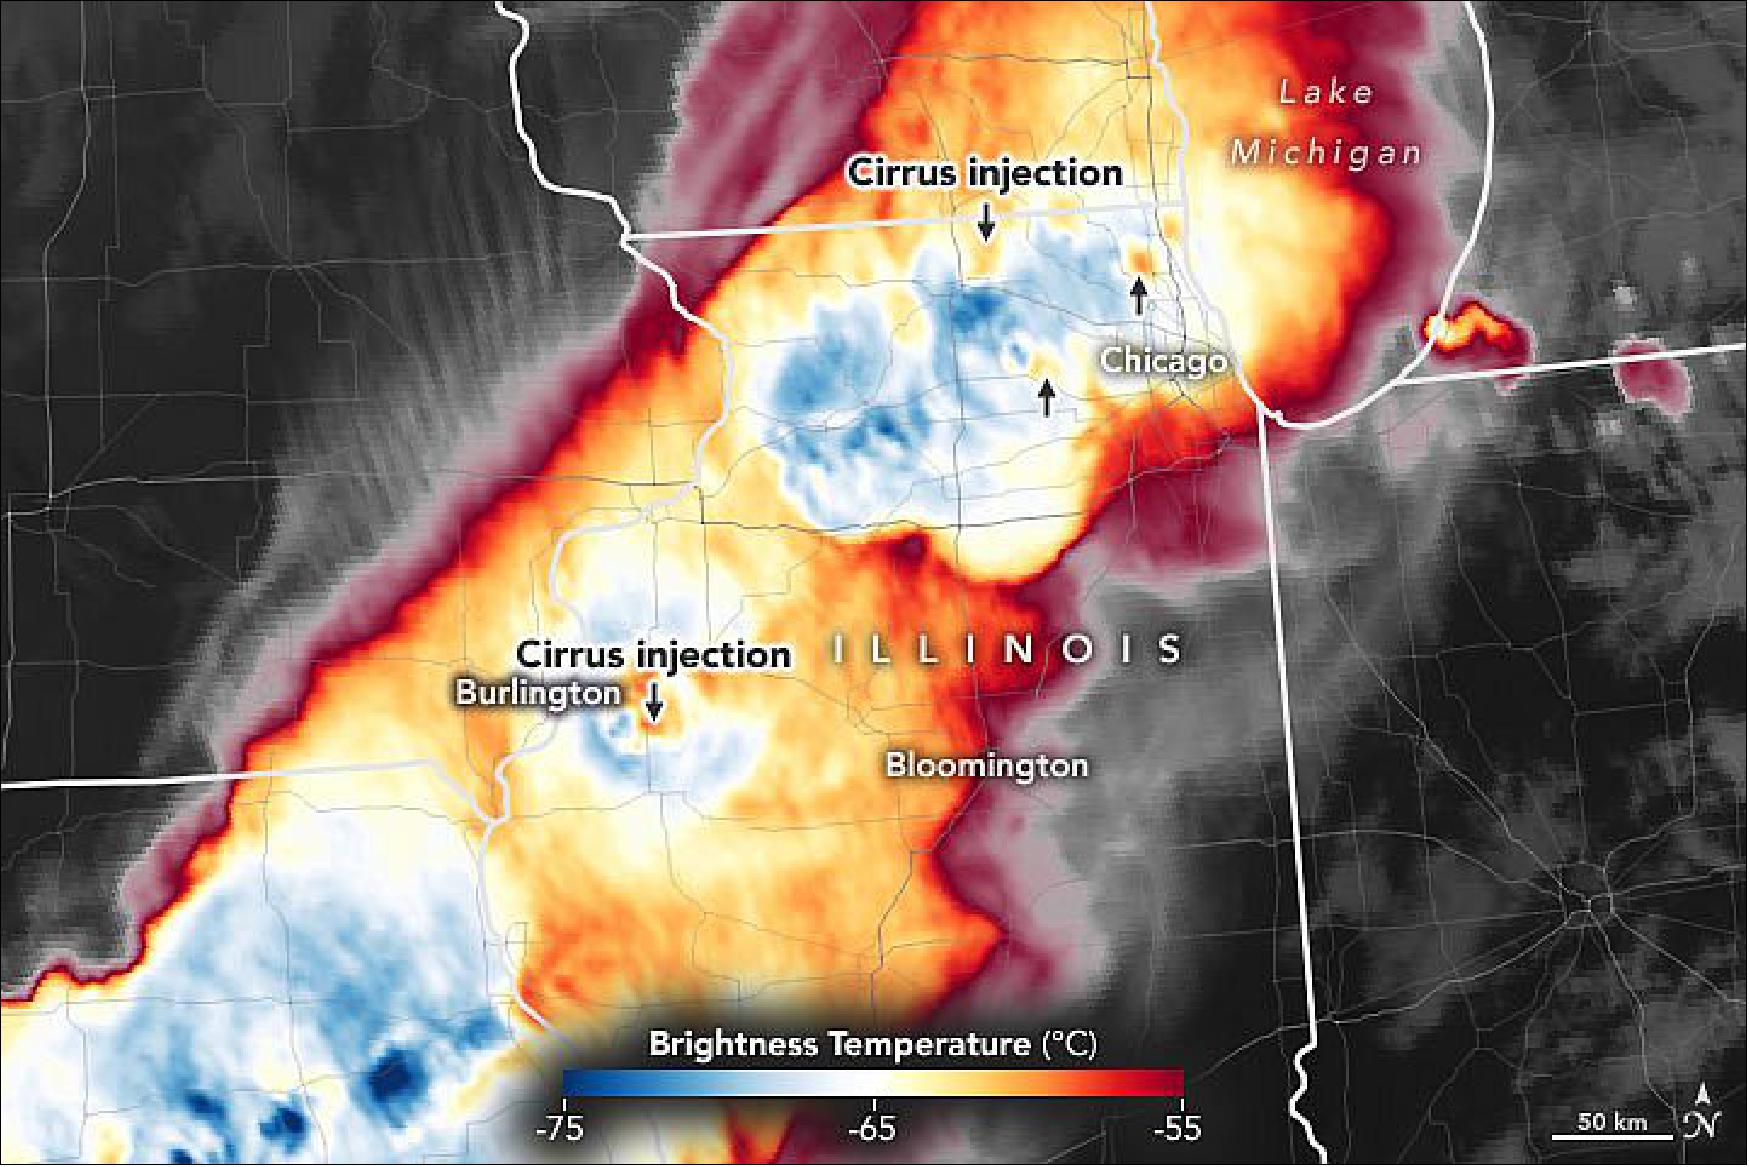 Figure 31: Detail image: From a satellite perspective, the dynamics of the storm system were more subtle, but they offered at least one early clue that the squall line had a good chance of unloading destructive weather. The cloud temperature data above, from the Advanced Baseline Imager (ABI) on the GOES-R satellite, was collected about 45 minutes before the tornado touched down. Warmer air is red and cooler air is blue. - “Notice the plumes of warm air downwind of updrafts—the cold overshooting cloud tops,” said Kristopher Bedka of NASA’s Langley Research Center. “Those are what we call ‘above-anvil cirrus plumes’ (AACPs)—cirrus clouds that were injected into the stratosphere.” [NASA Earth Observatory images by Joshua Stevens, using GOES-16 (former GOES-R designation) imagery courtesy of NOAA and the National Environmental Satellite, Data, and Information Service (NESDIS). Story by Adam Voiland]